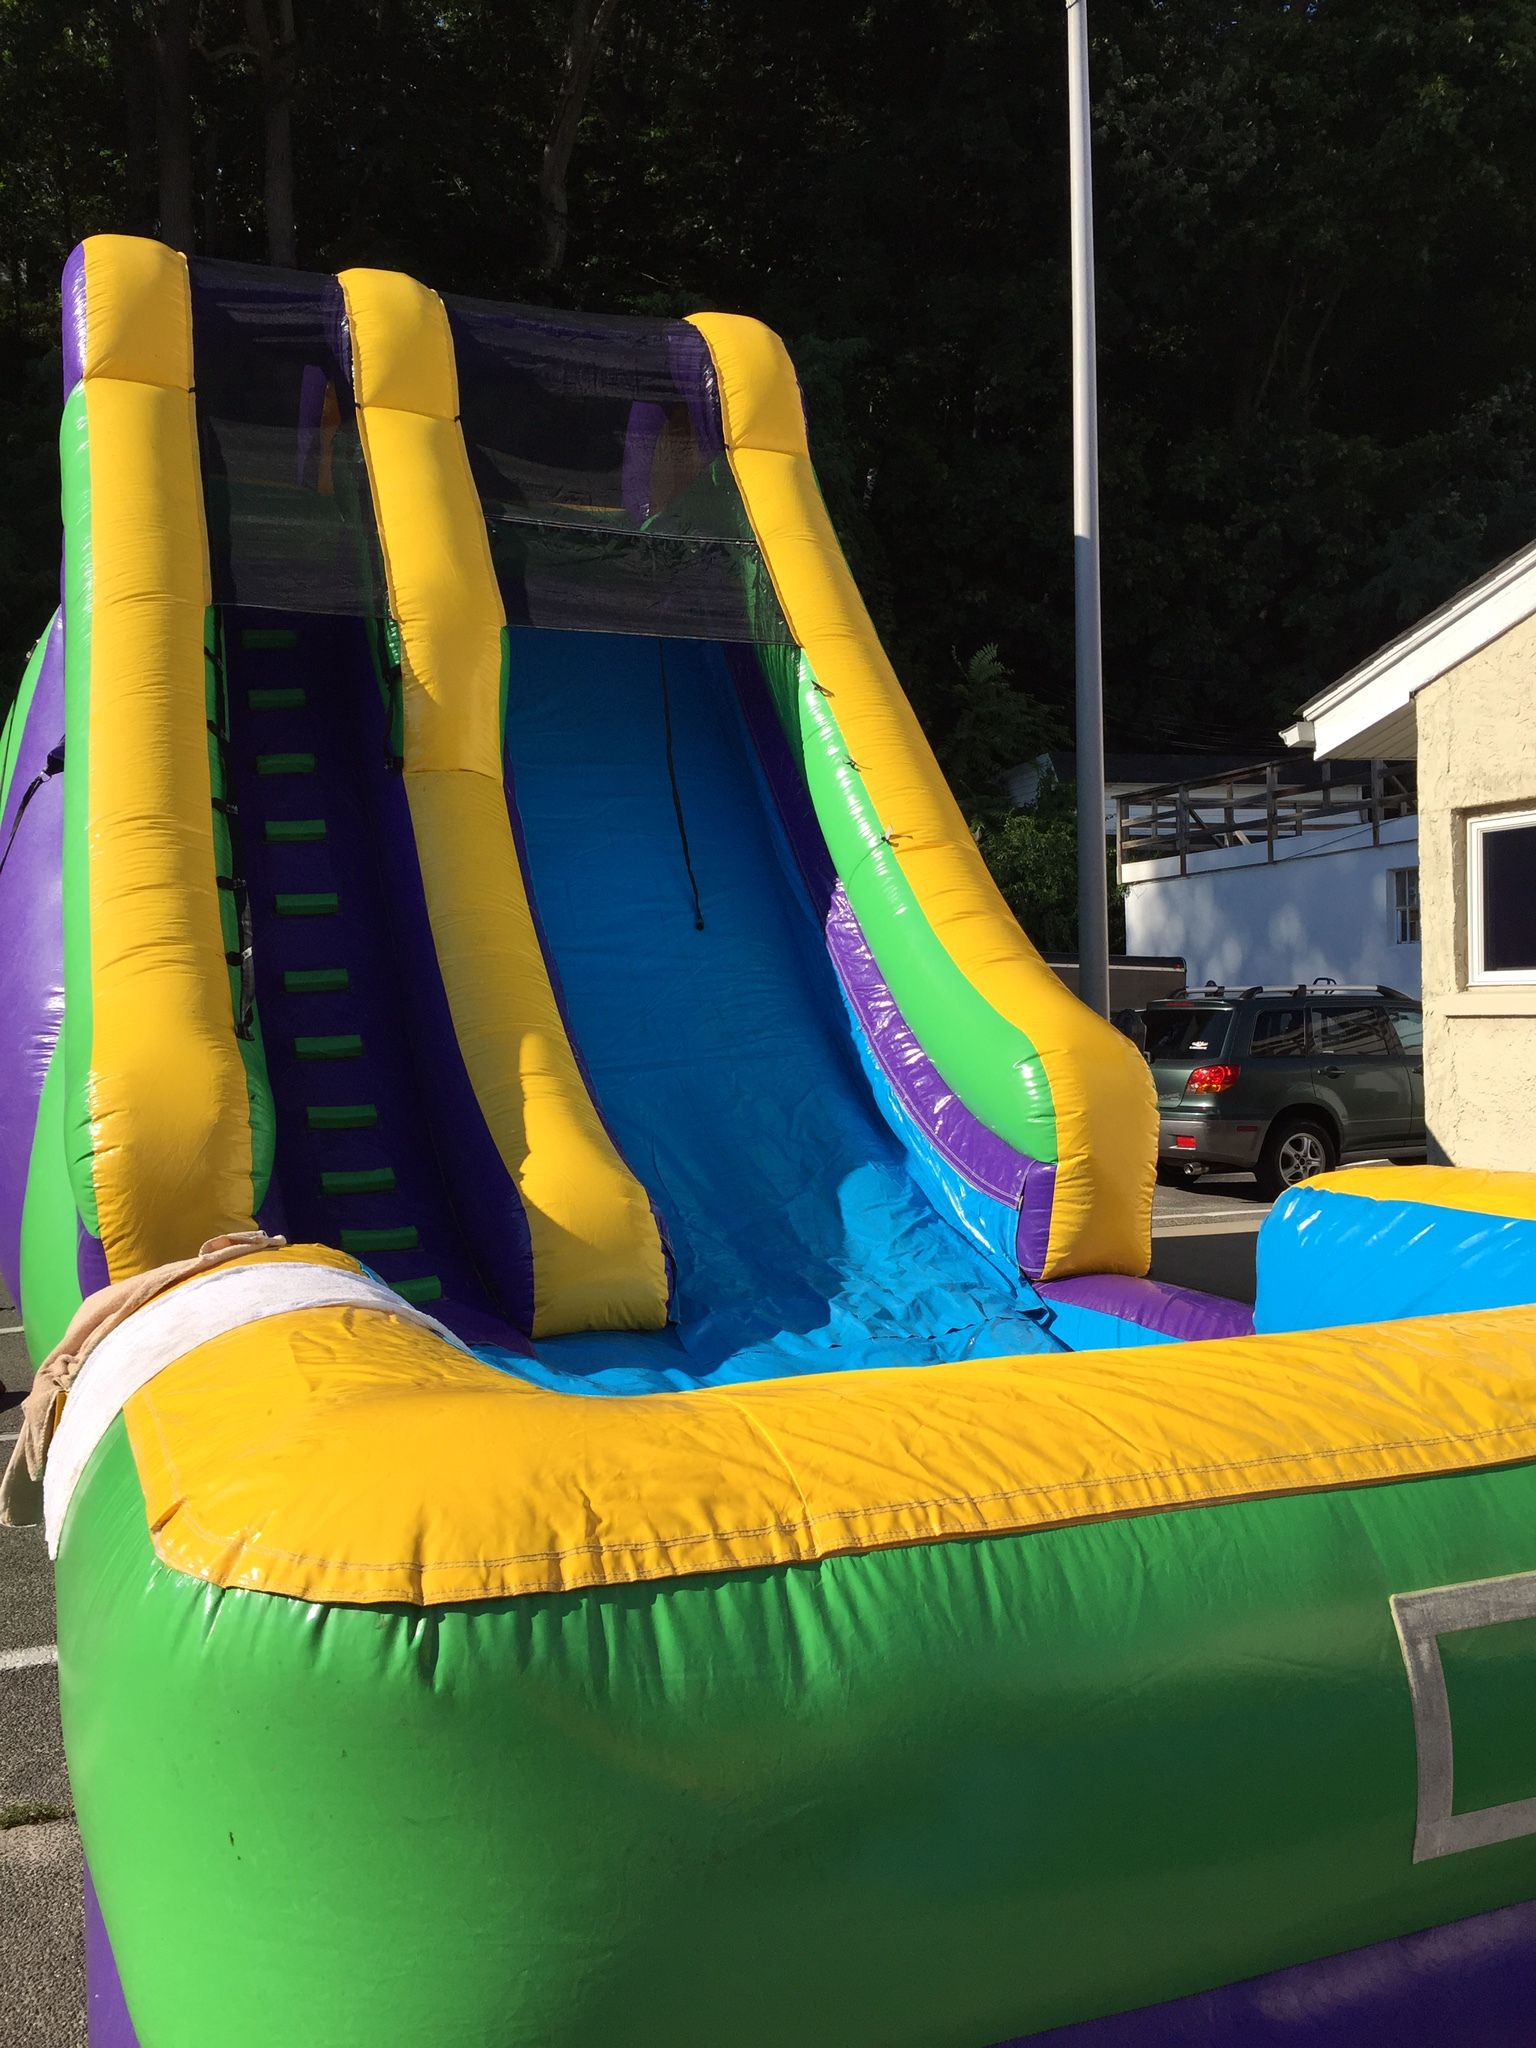 23'  Wet/Dry Inflatable Slide - This is a crowd pleasure on any seasonal day, whether wet or dry this is a blast!